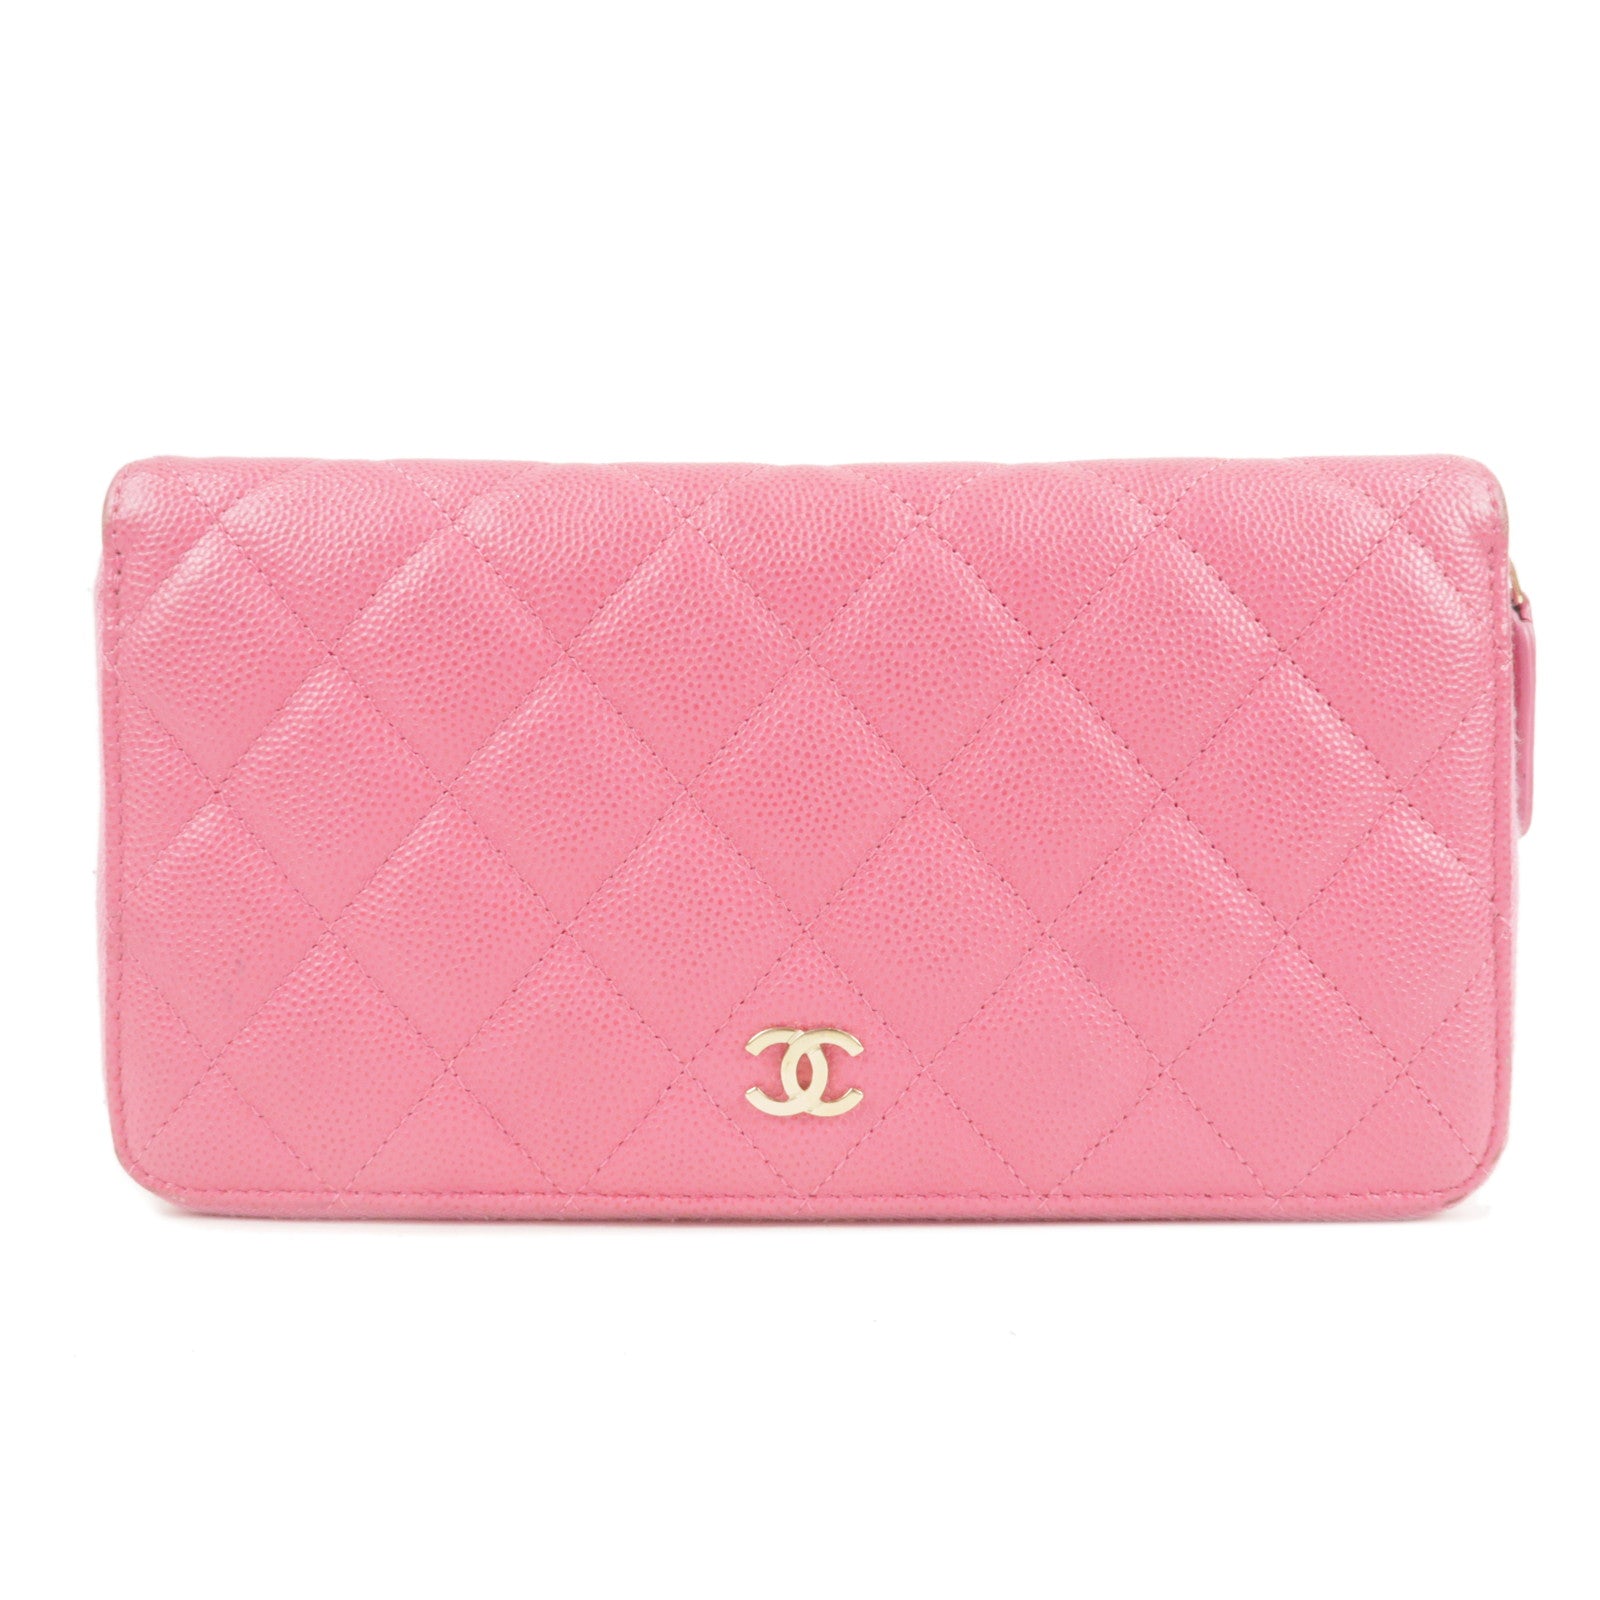 CHANEL Caviar Quilted Long Flap Wallet Light Pink 67535